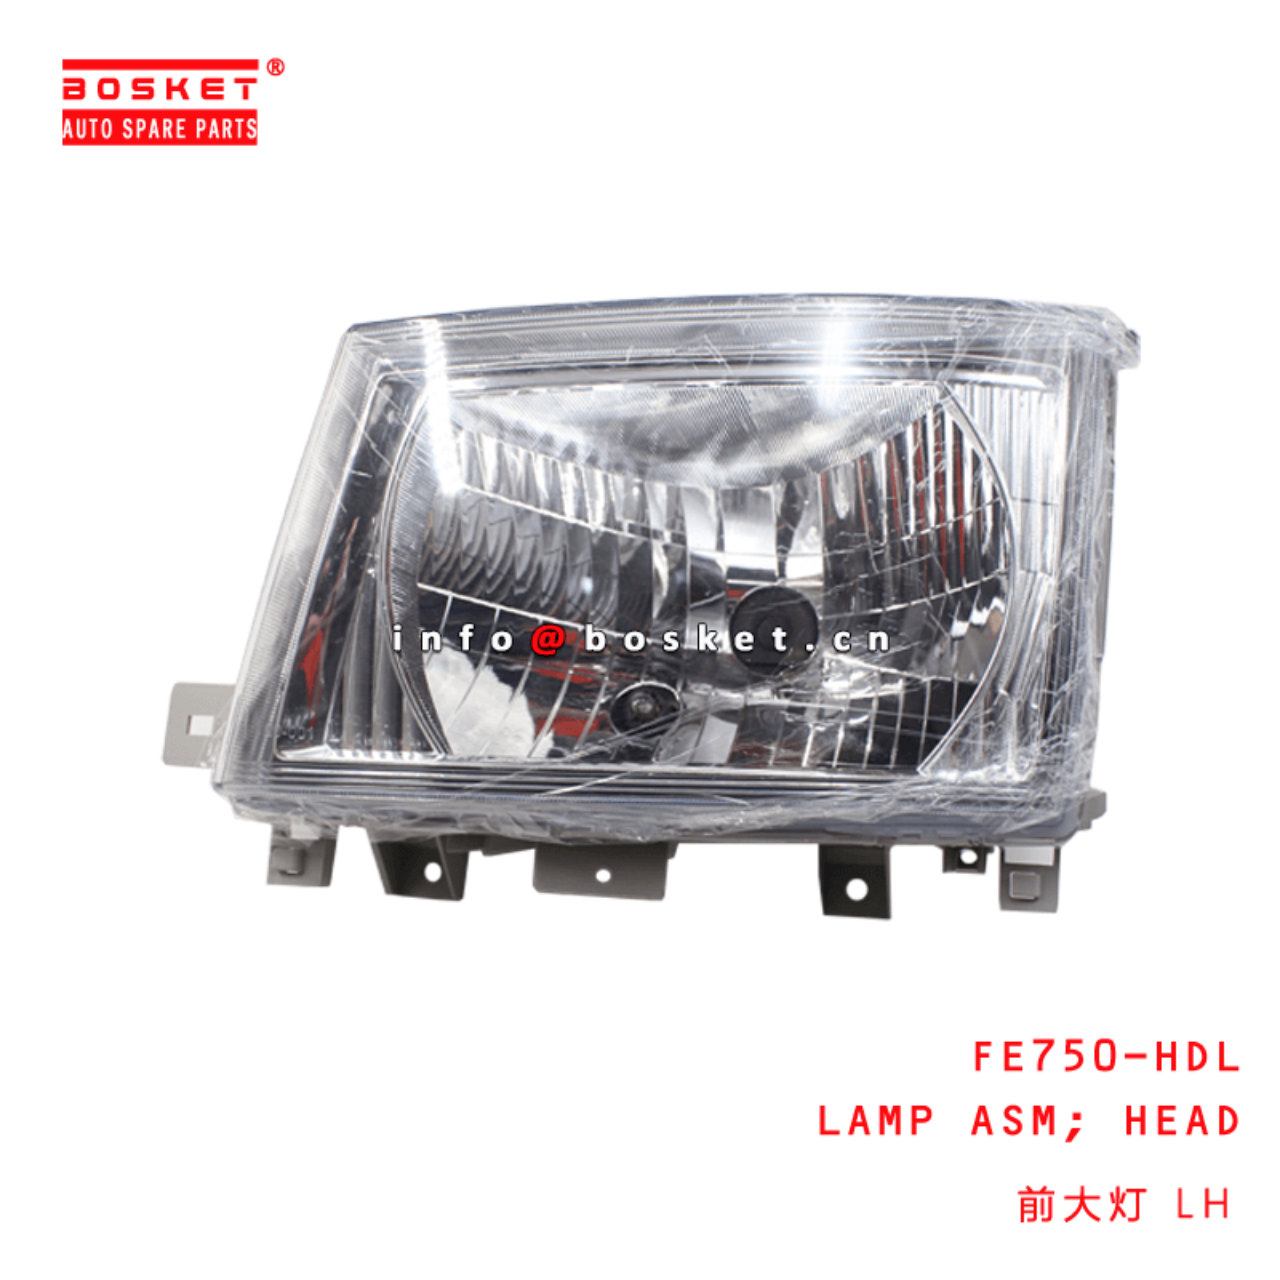 FE750-HDL Head Lamp Assembly Suitable For MITSUBISHI FUSO CANTER FE750